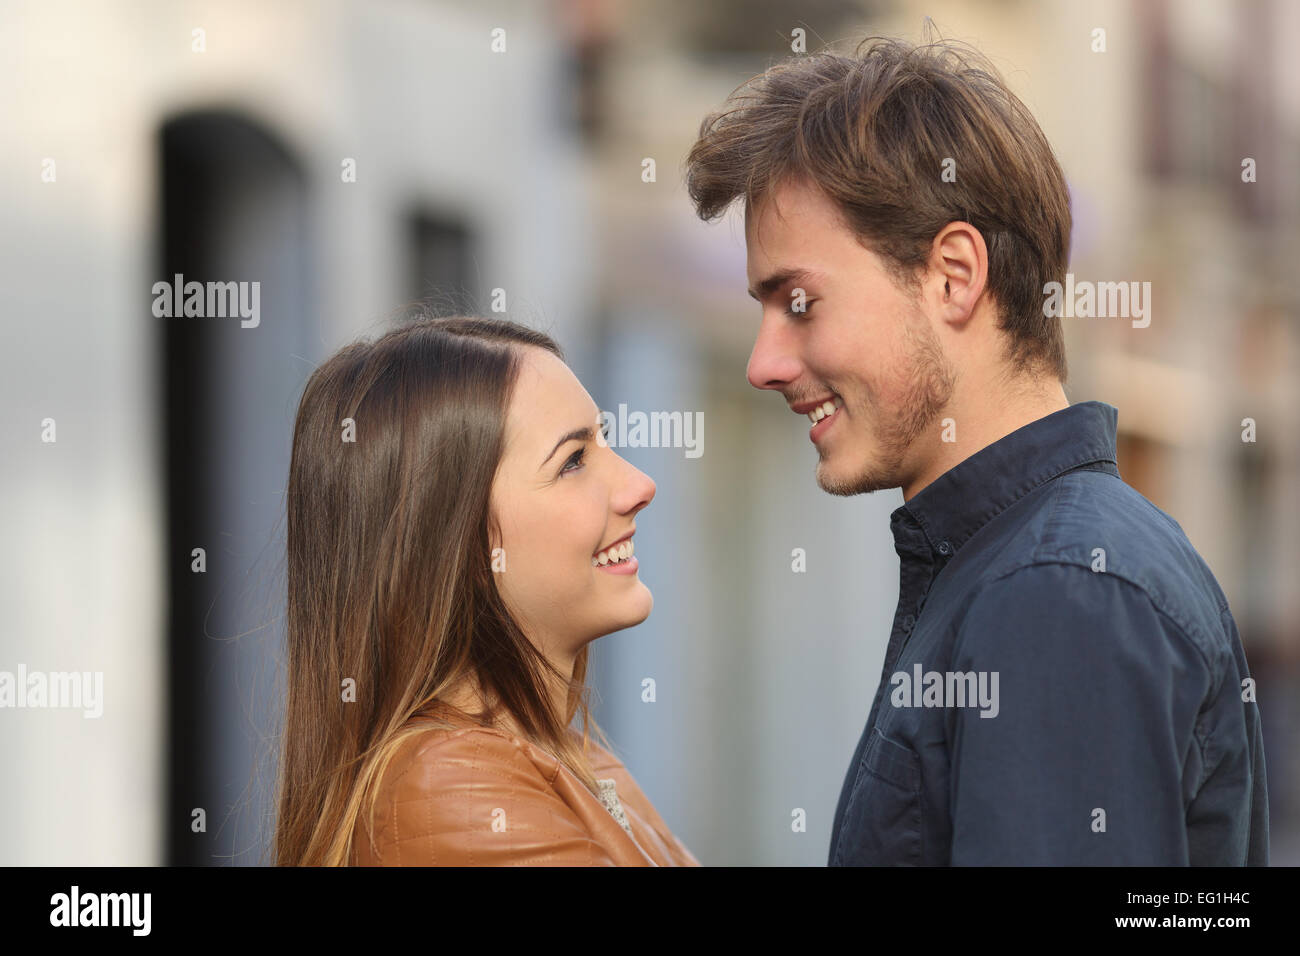 Profile of a happy couple looking each other affectionate in the street Stock Photo